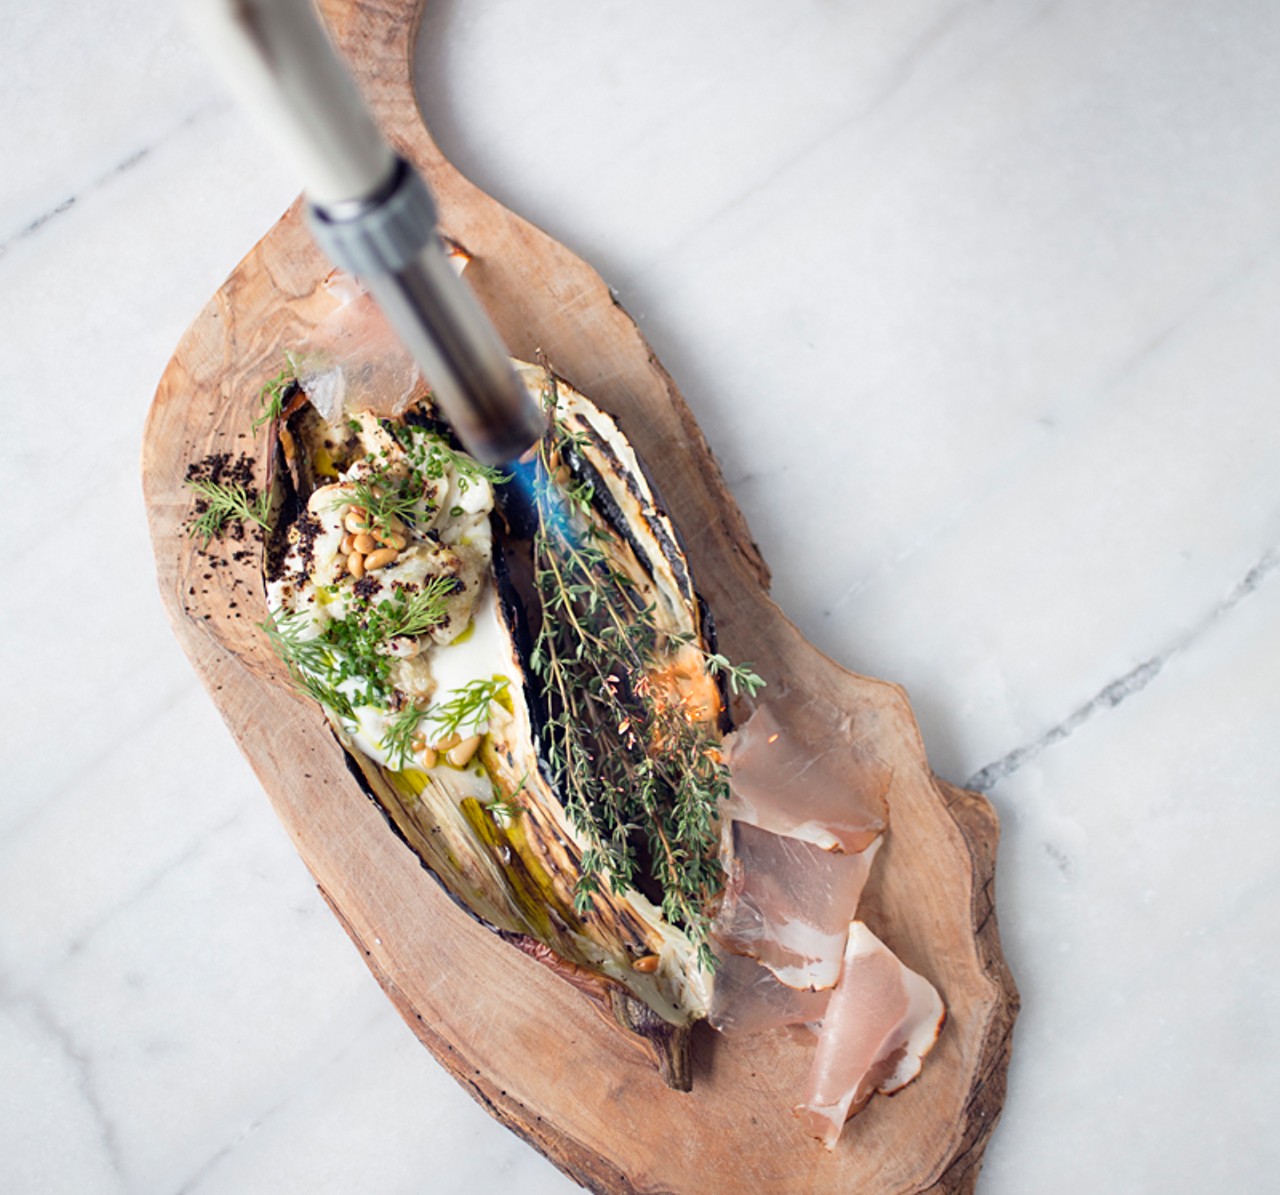 At Elaia - Charred eggplant, labneh, pinenuts, lonza, dill. Kitchen torch lighting the thyme.